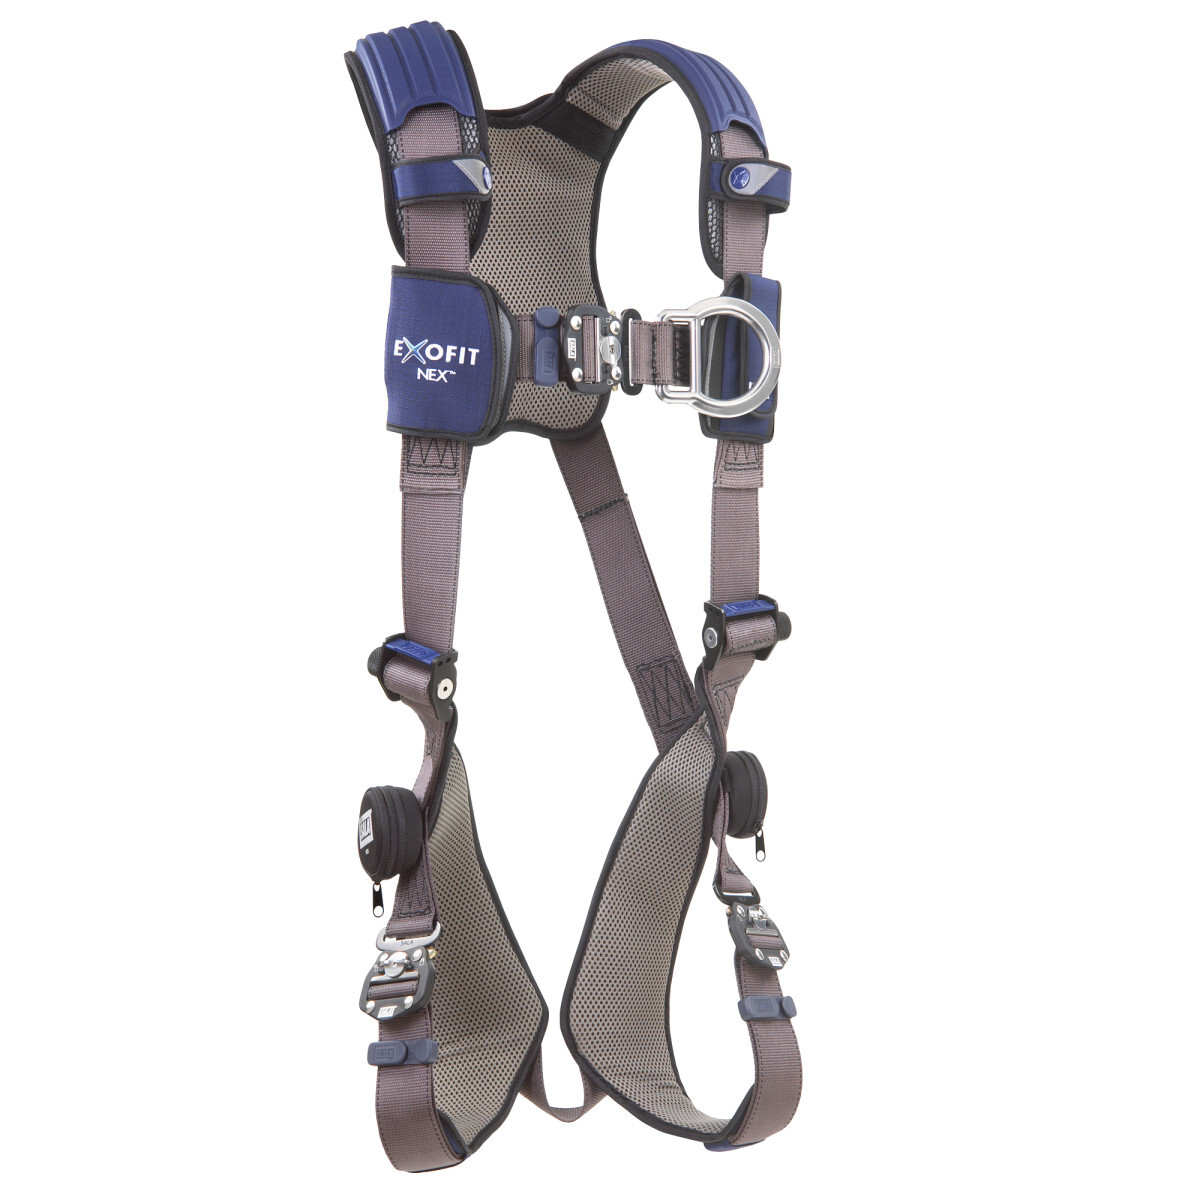 3M™ DBI-SALA® 2X ExoFit™ NEX™ Climbing Vest Style Harness With Aluminum Back And Front D-Rings, Locking Quick Connect Buckle Leg